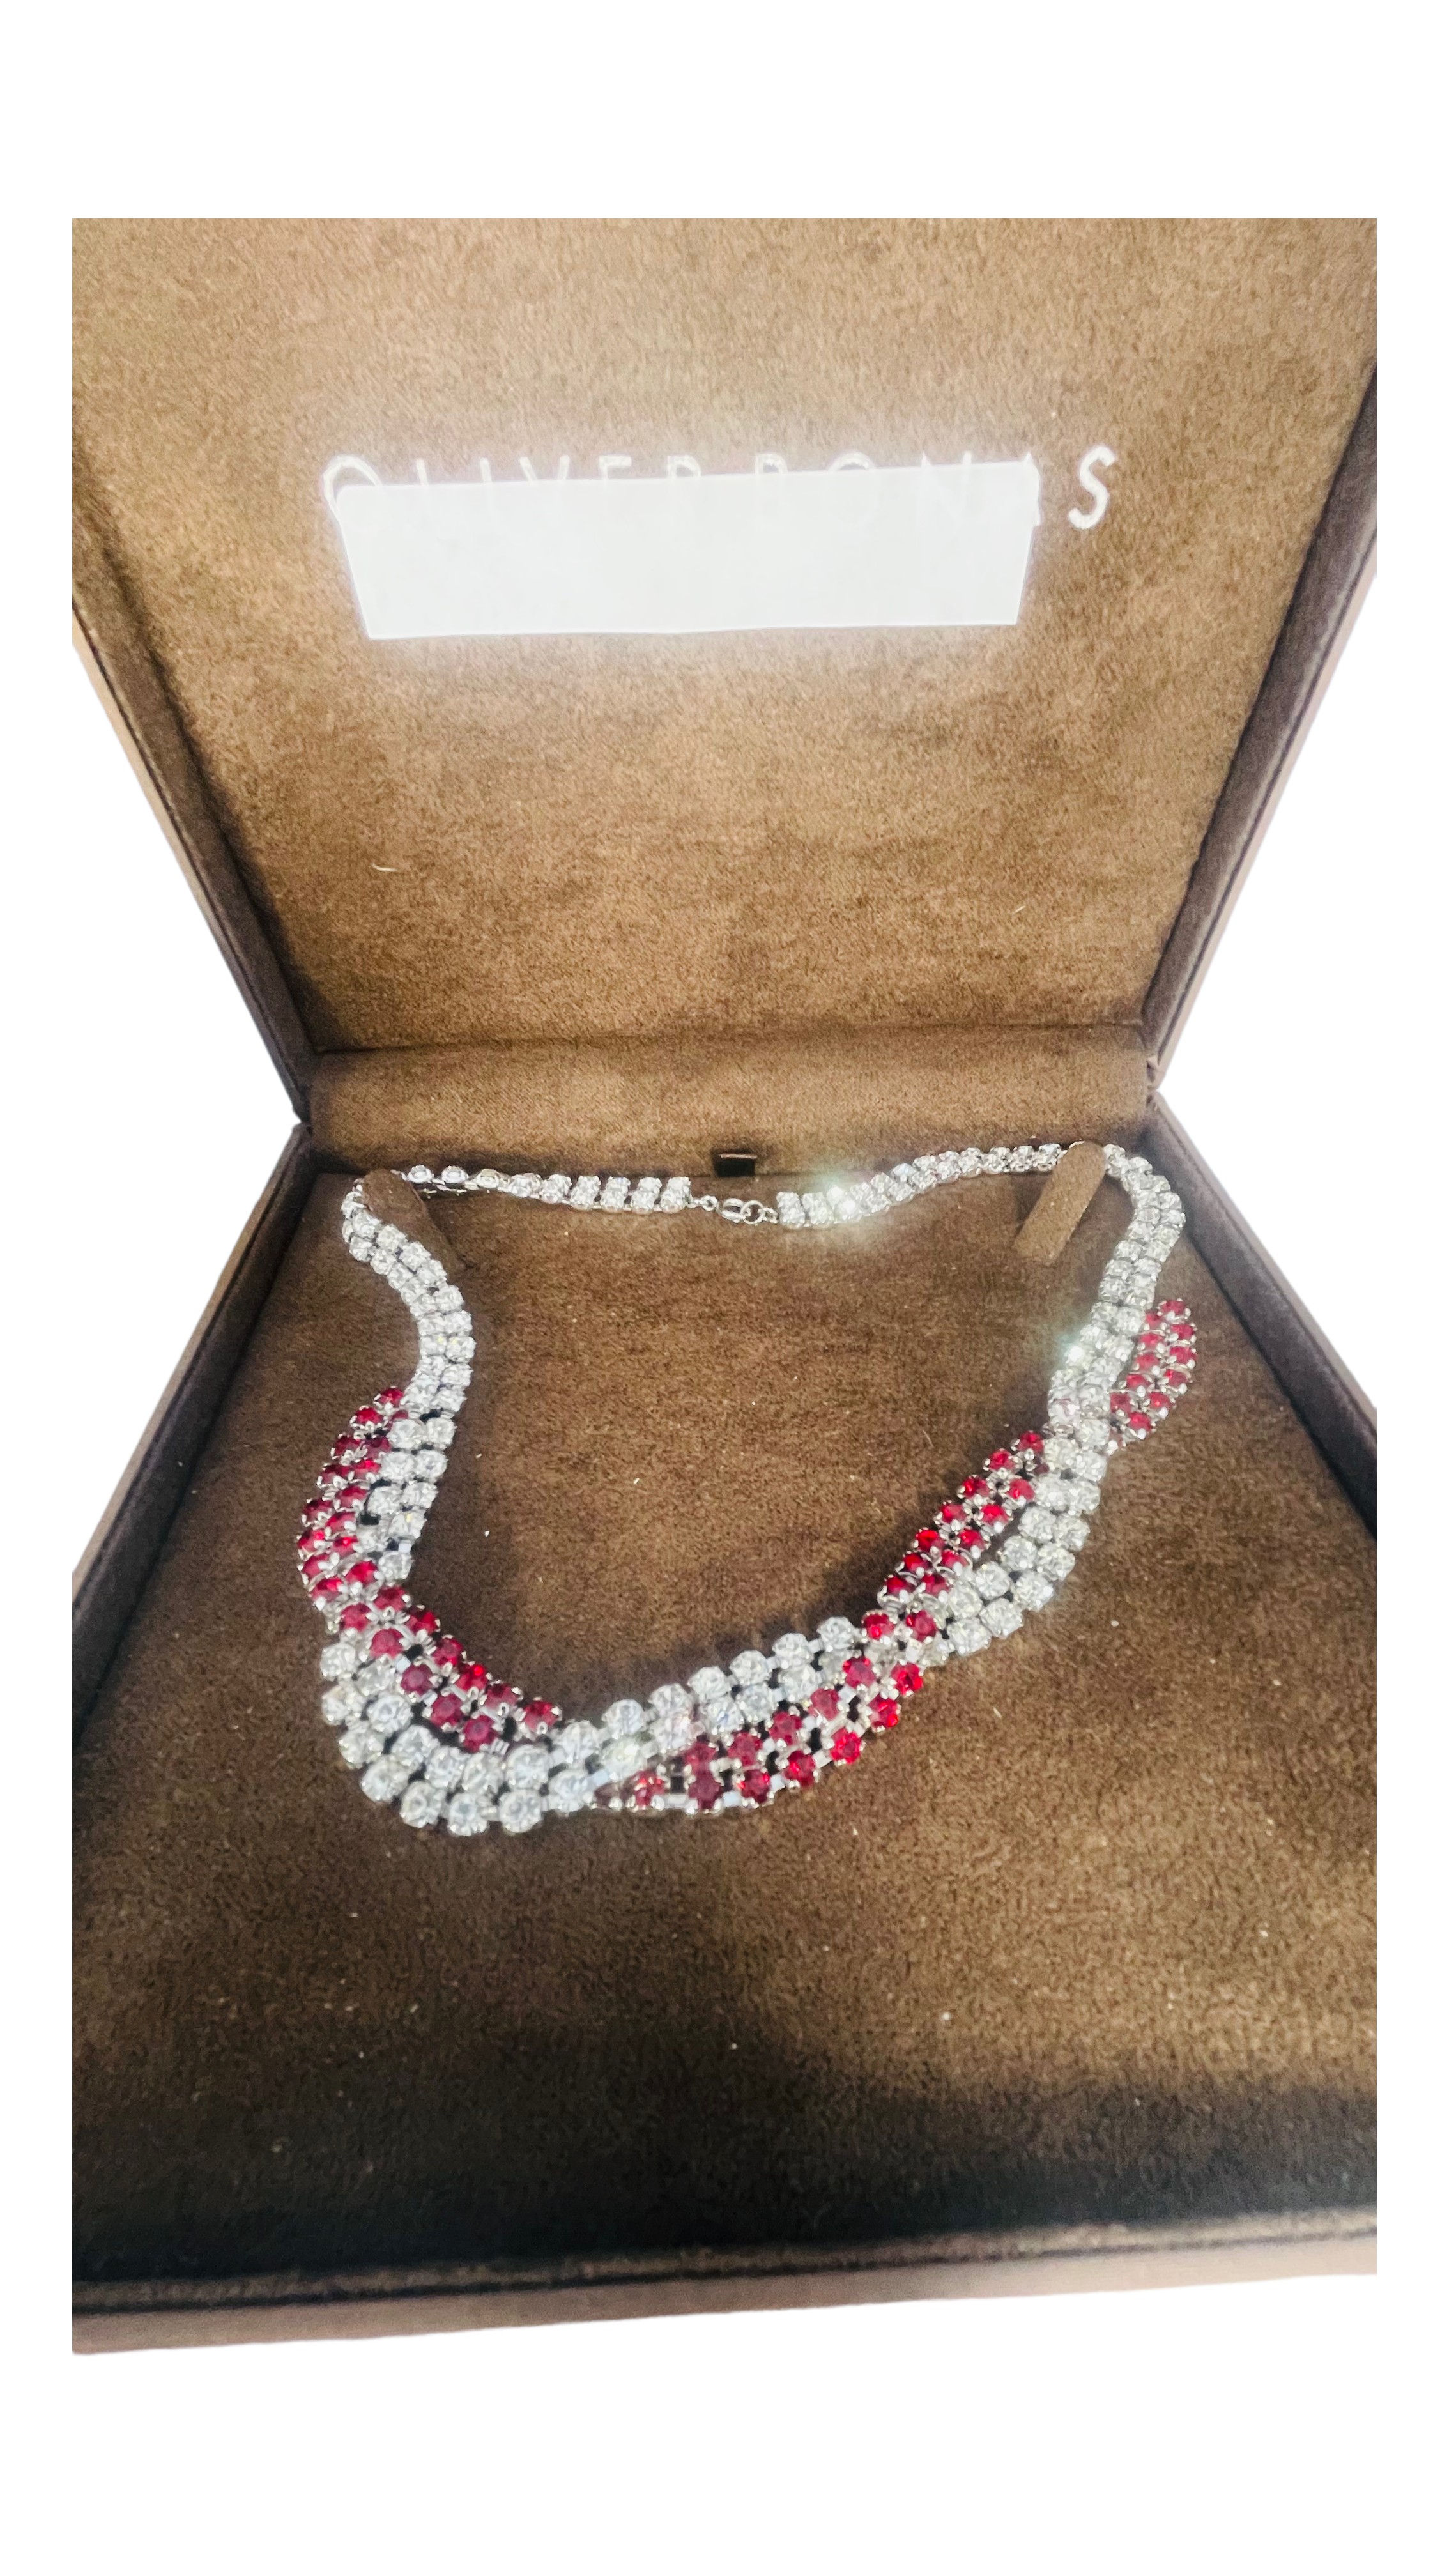 A large quantity of silver and costume jewels, including a grey and black ceramic necklace, pink and